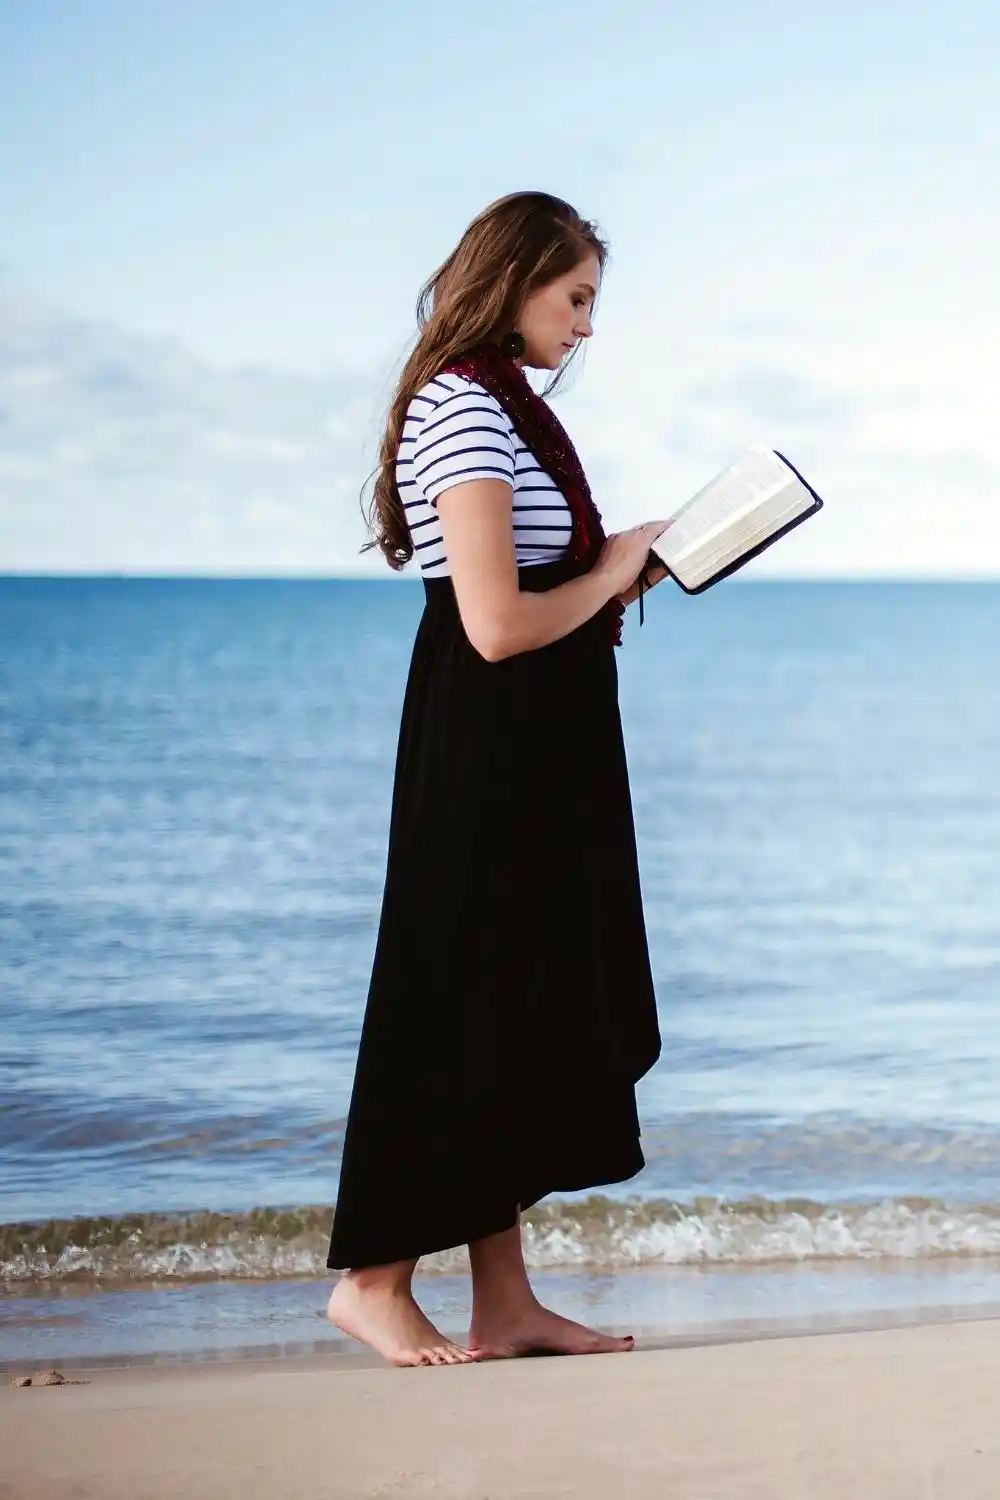 Women wearing long dress and reading Bible at the beach